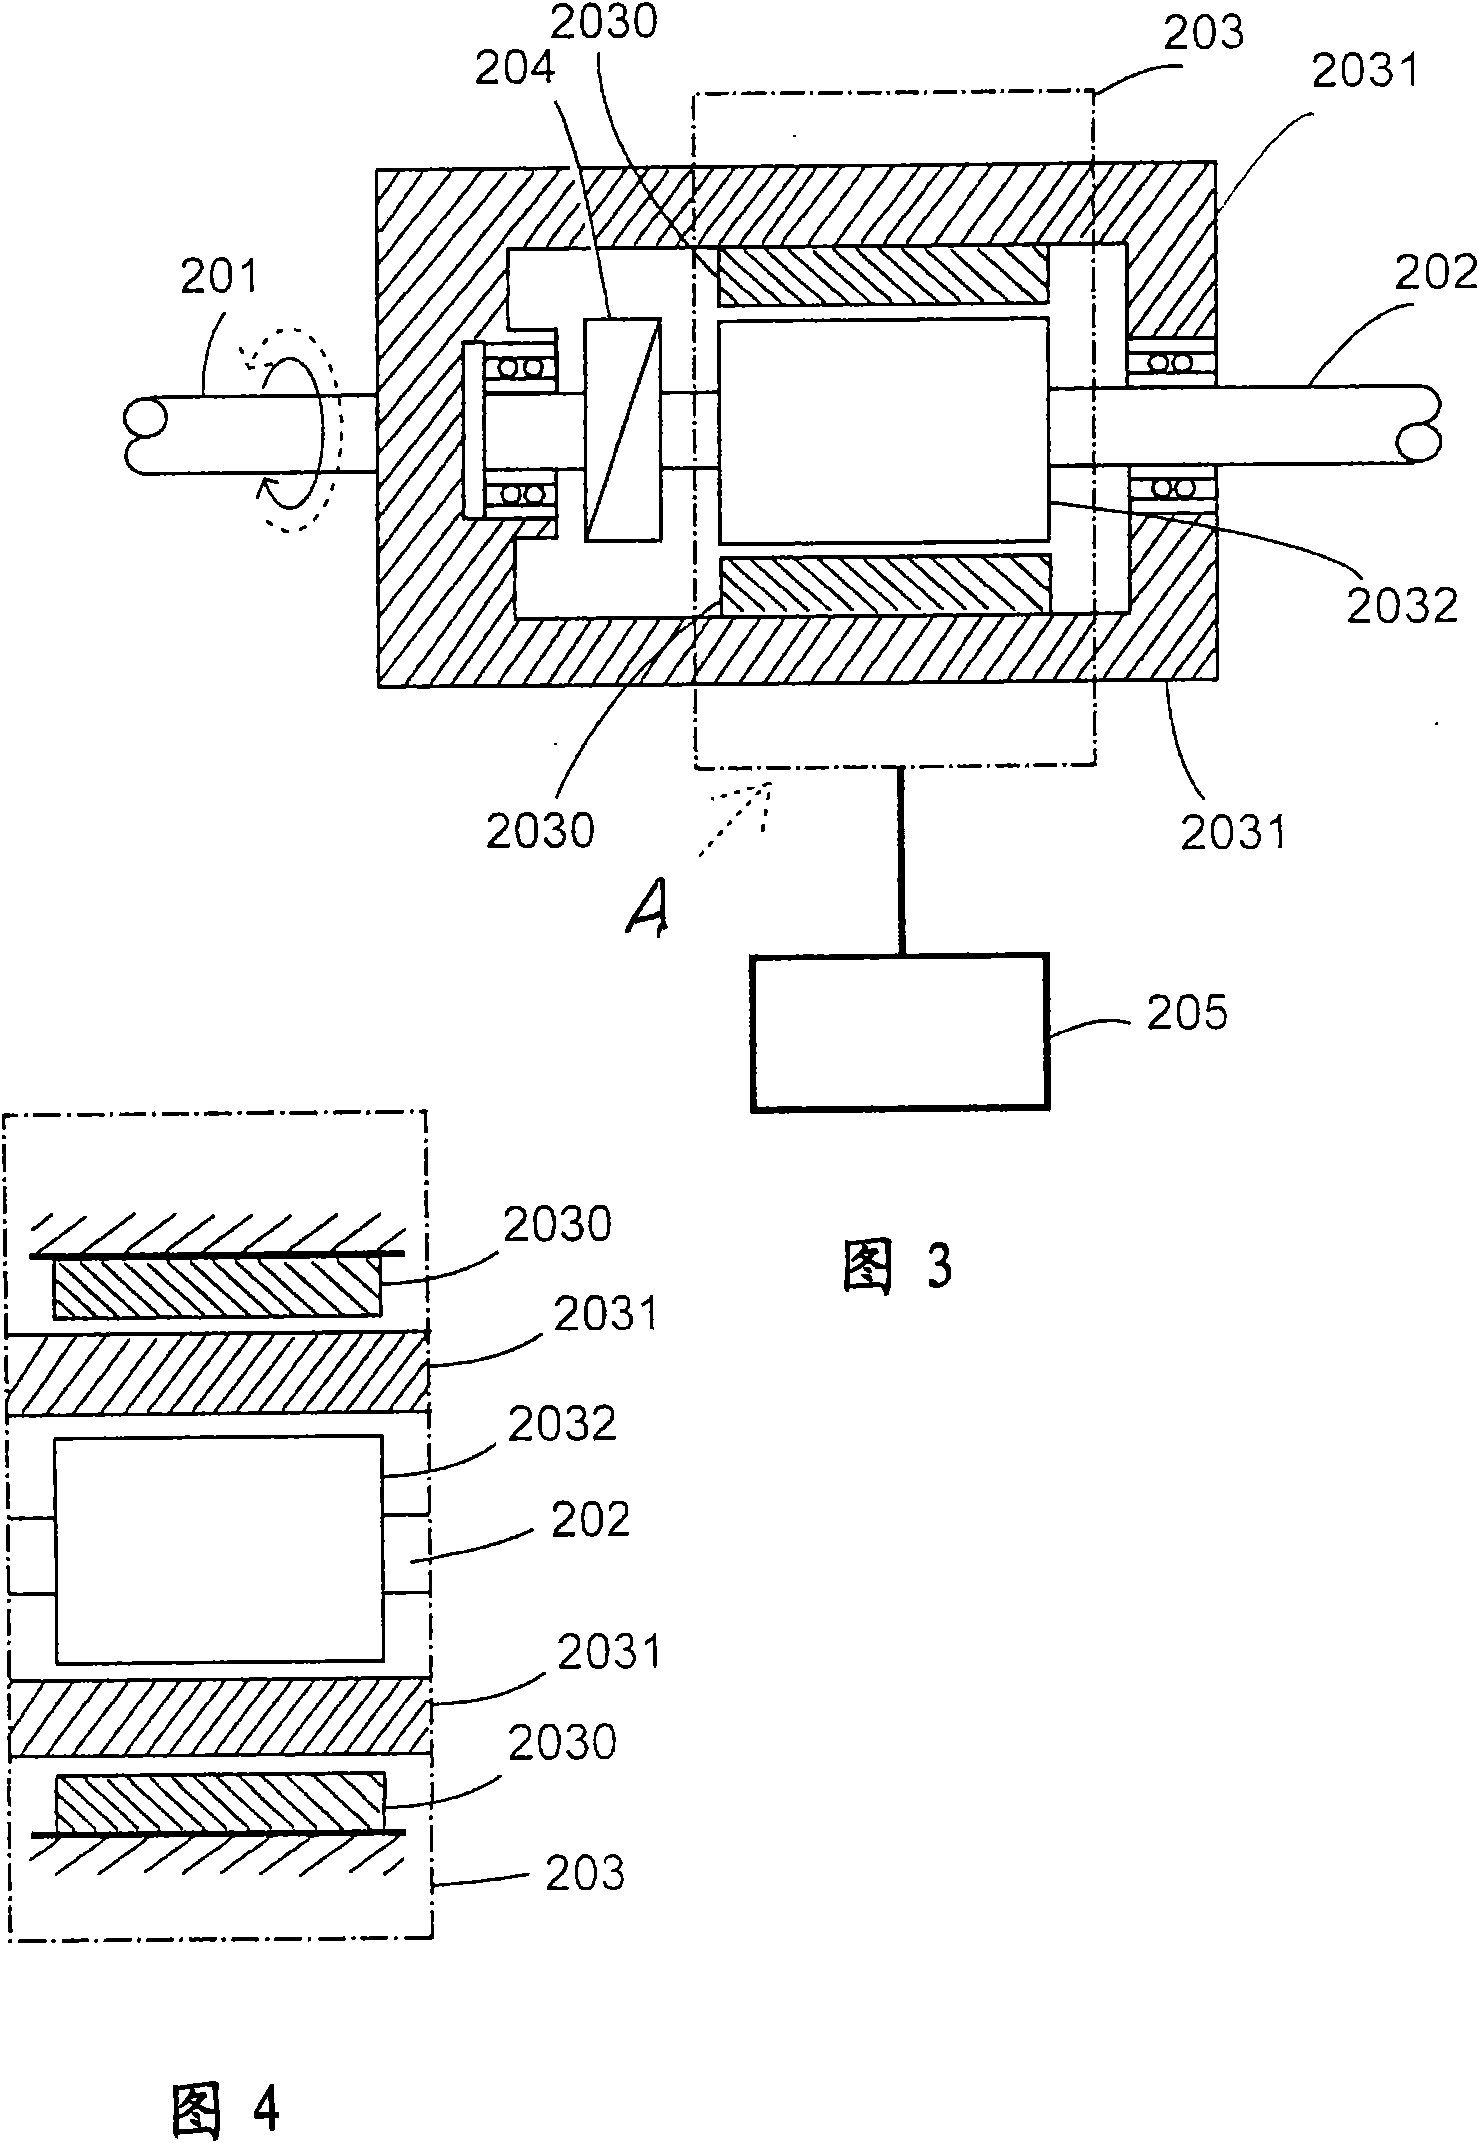 Bidirectional coupling device with same or different transmission characteristics